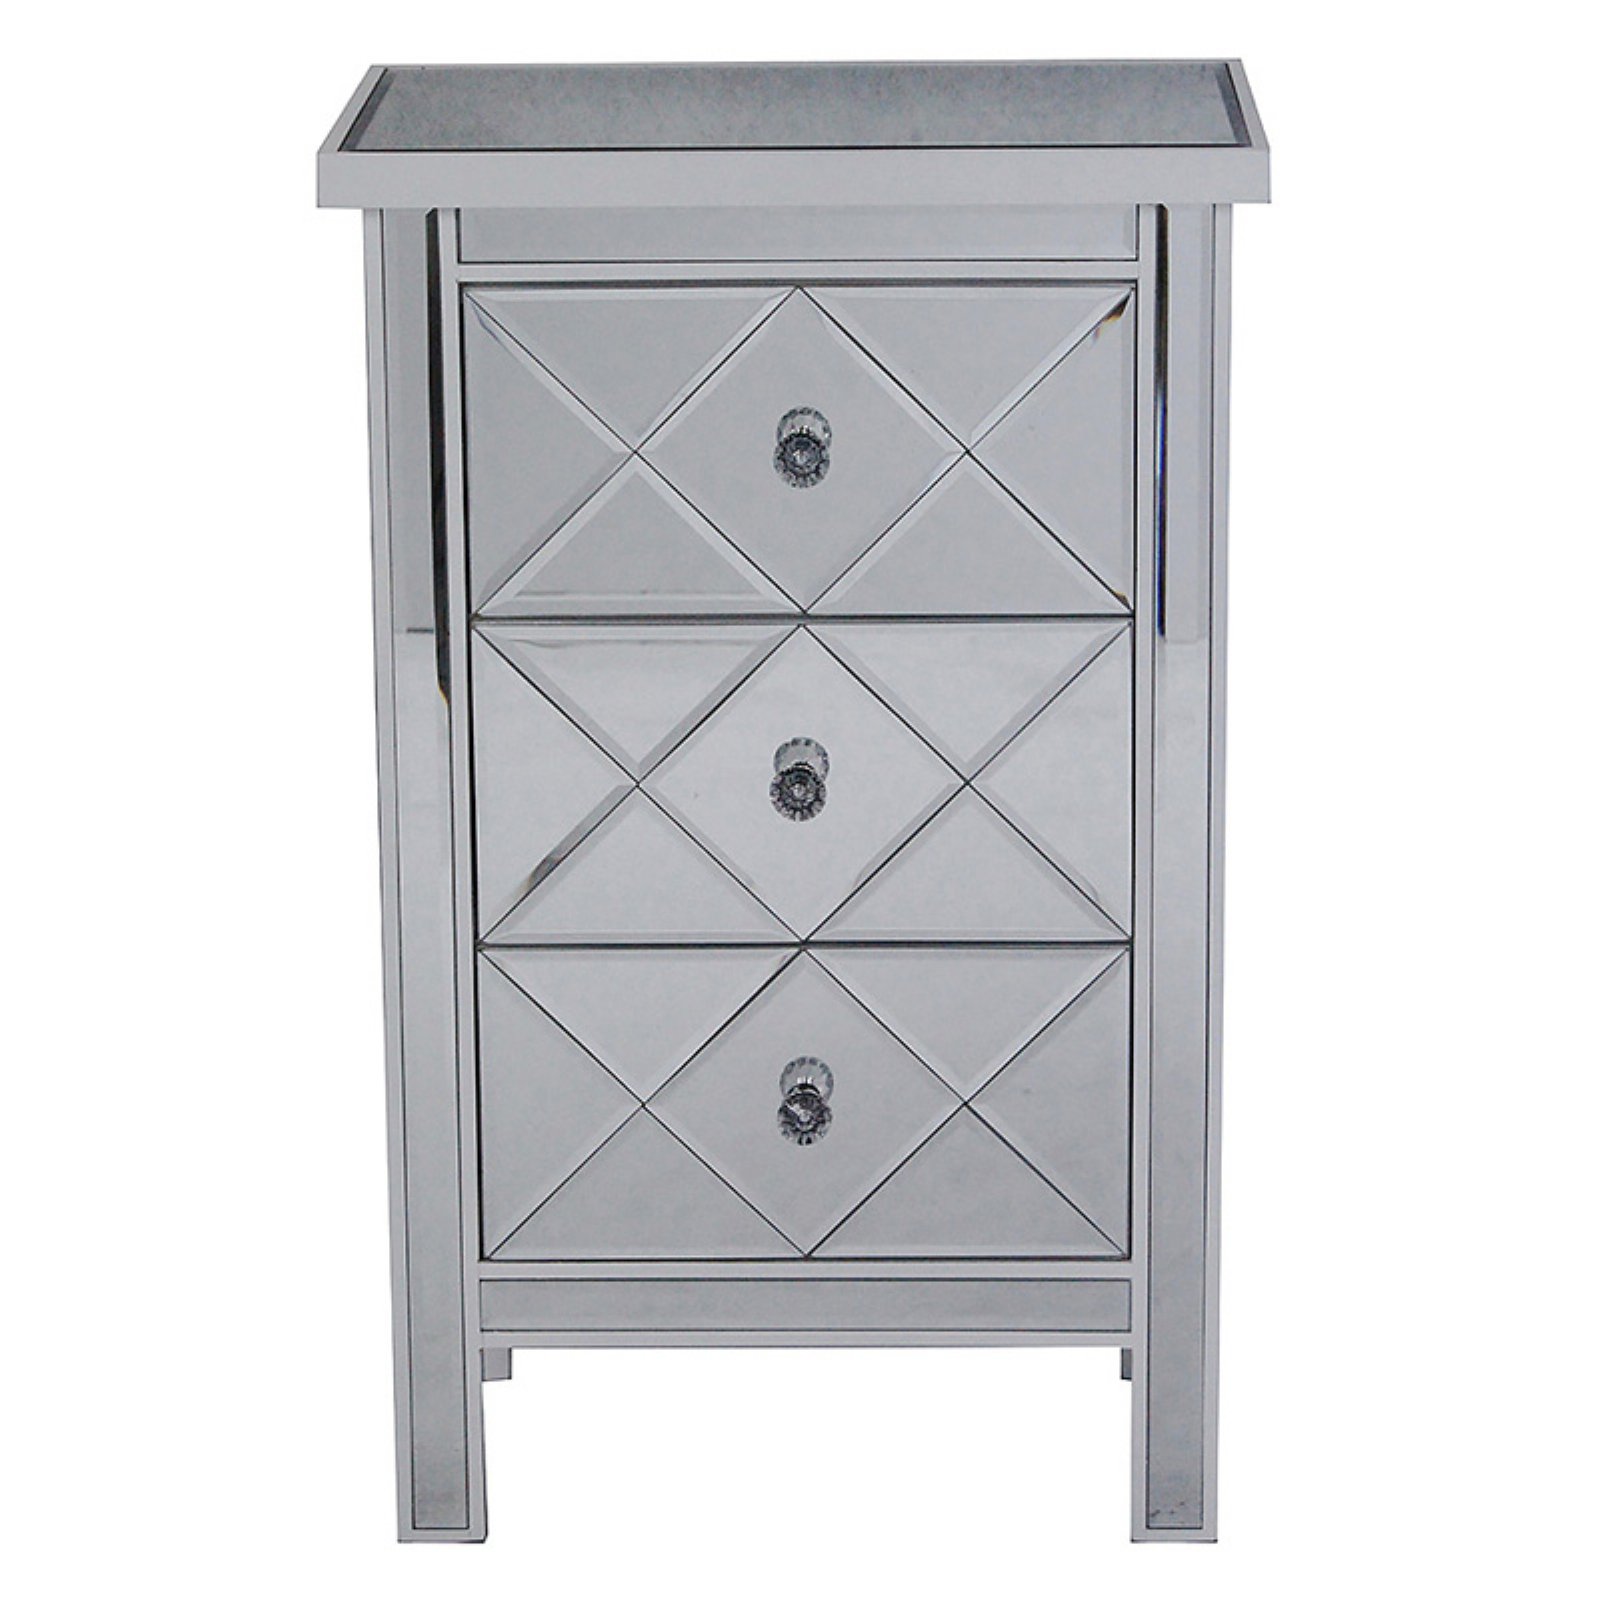 Heather Ann Creations Emmy 3 Drawer Mirrored Accent Cabinet - image 4 of 7